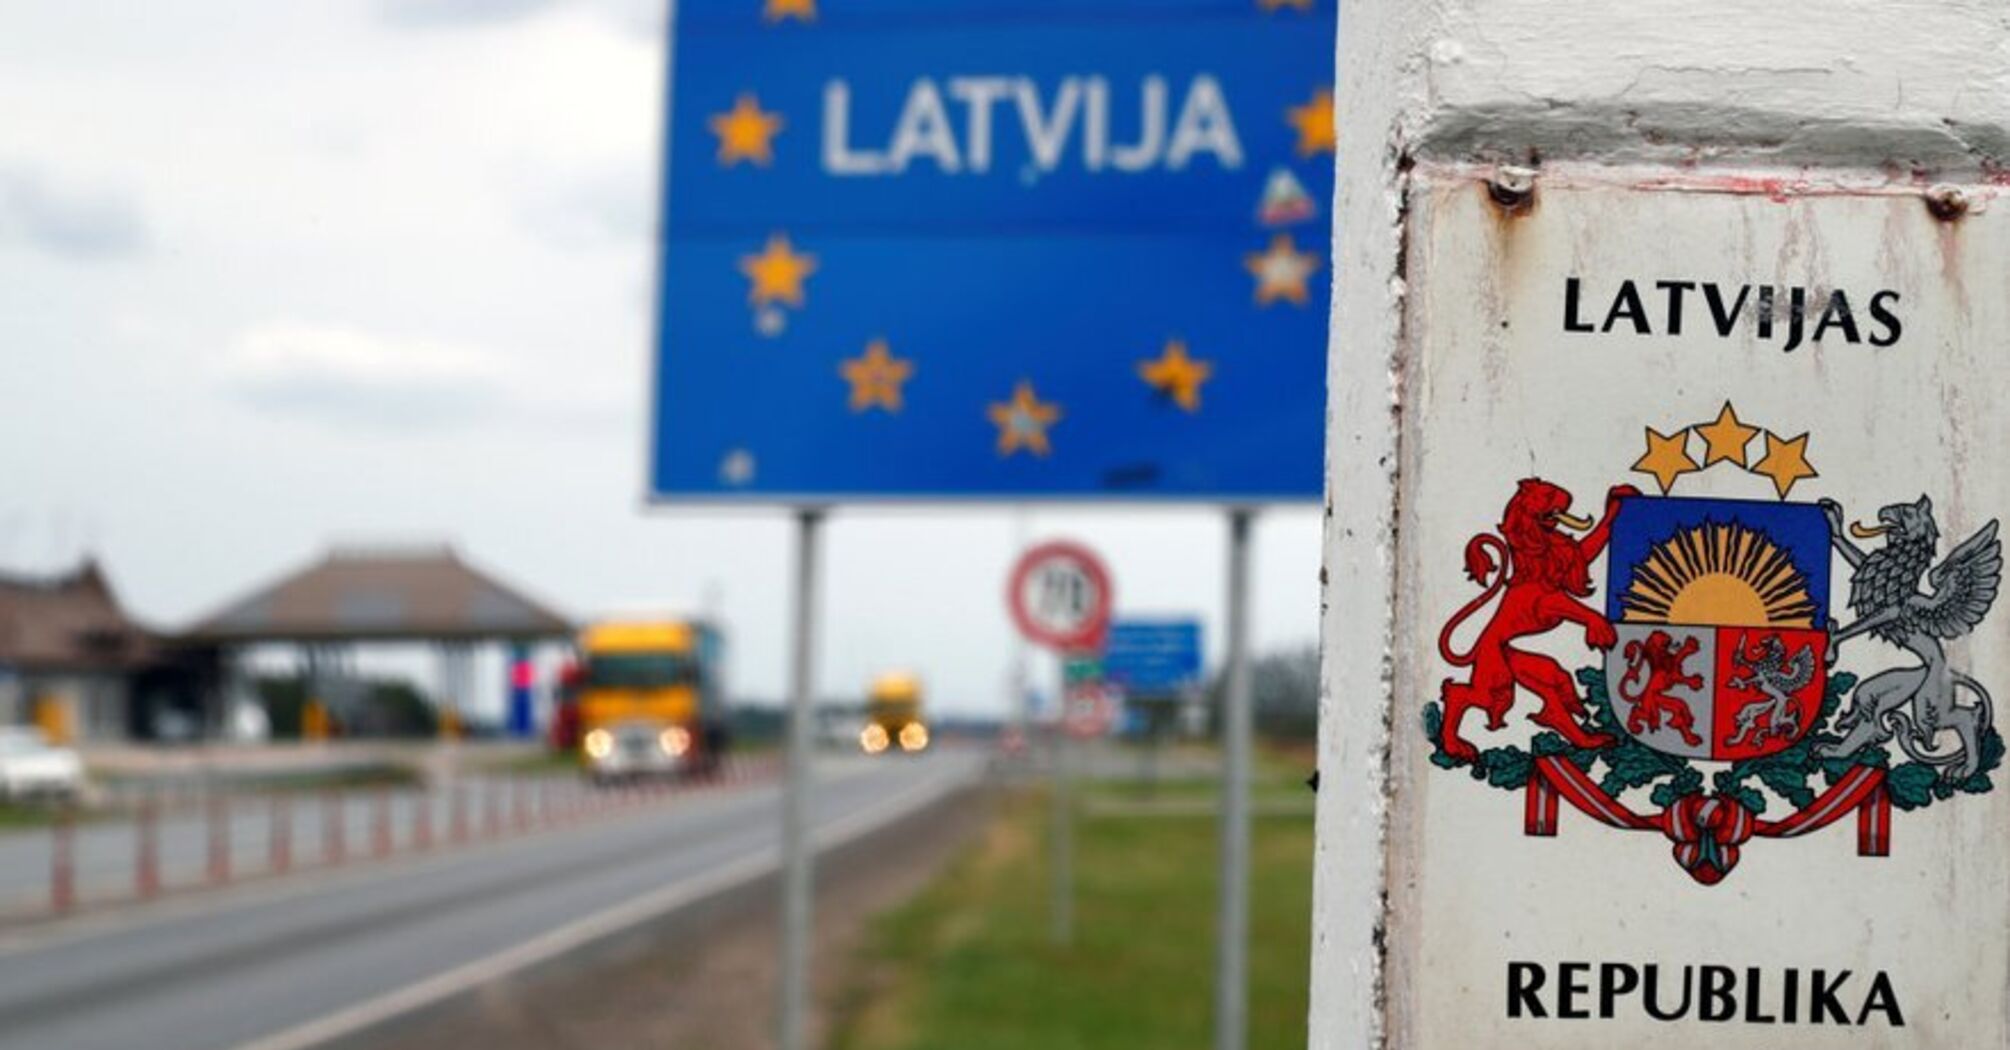 Russians and Belarusians tried to cross the Latvian border